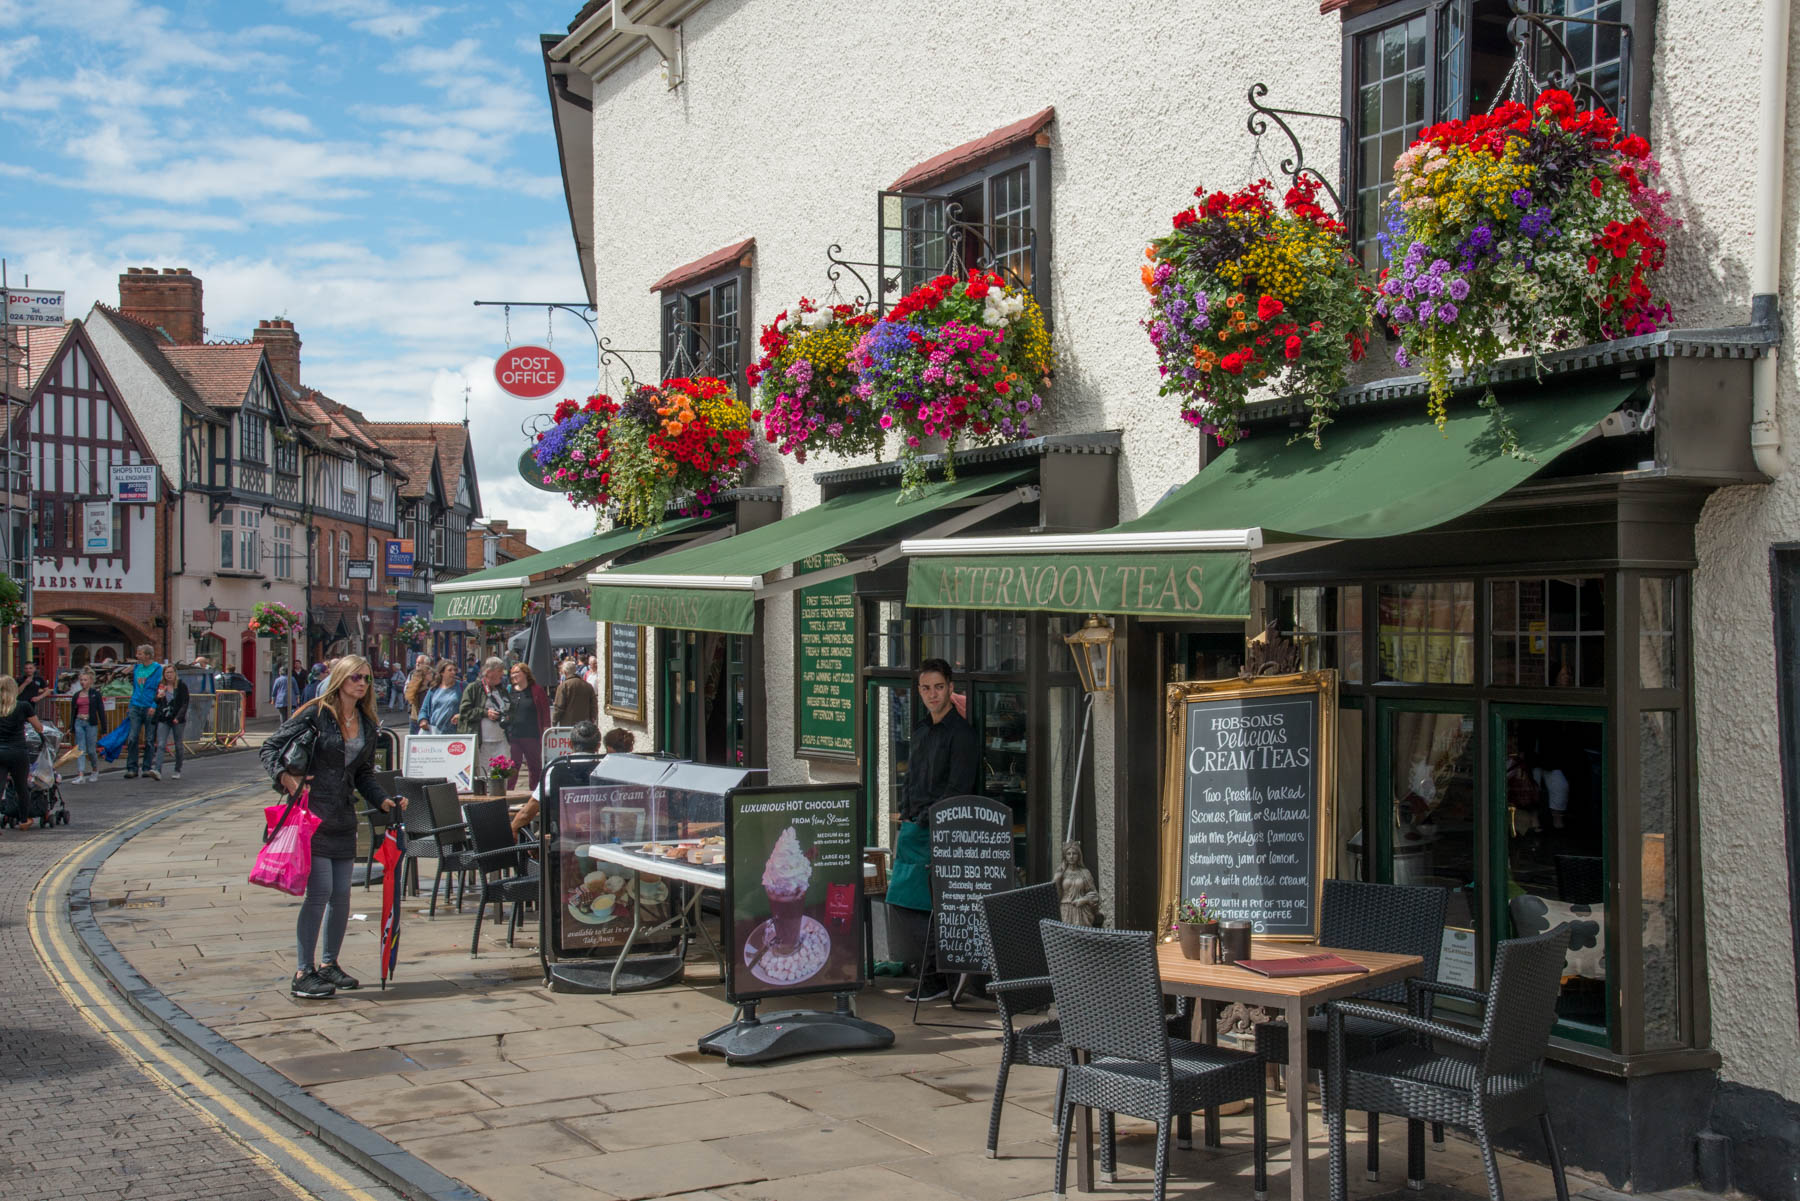 A prety shopping street in Stratford with seats outside cafes and large hanging baskets of flowers.